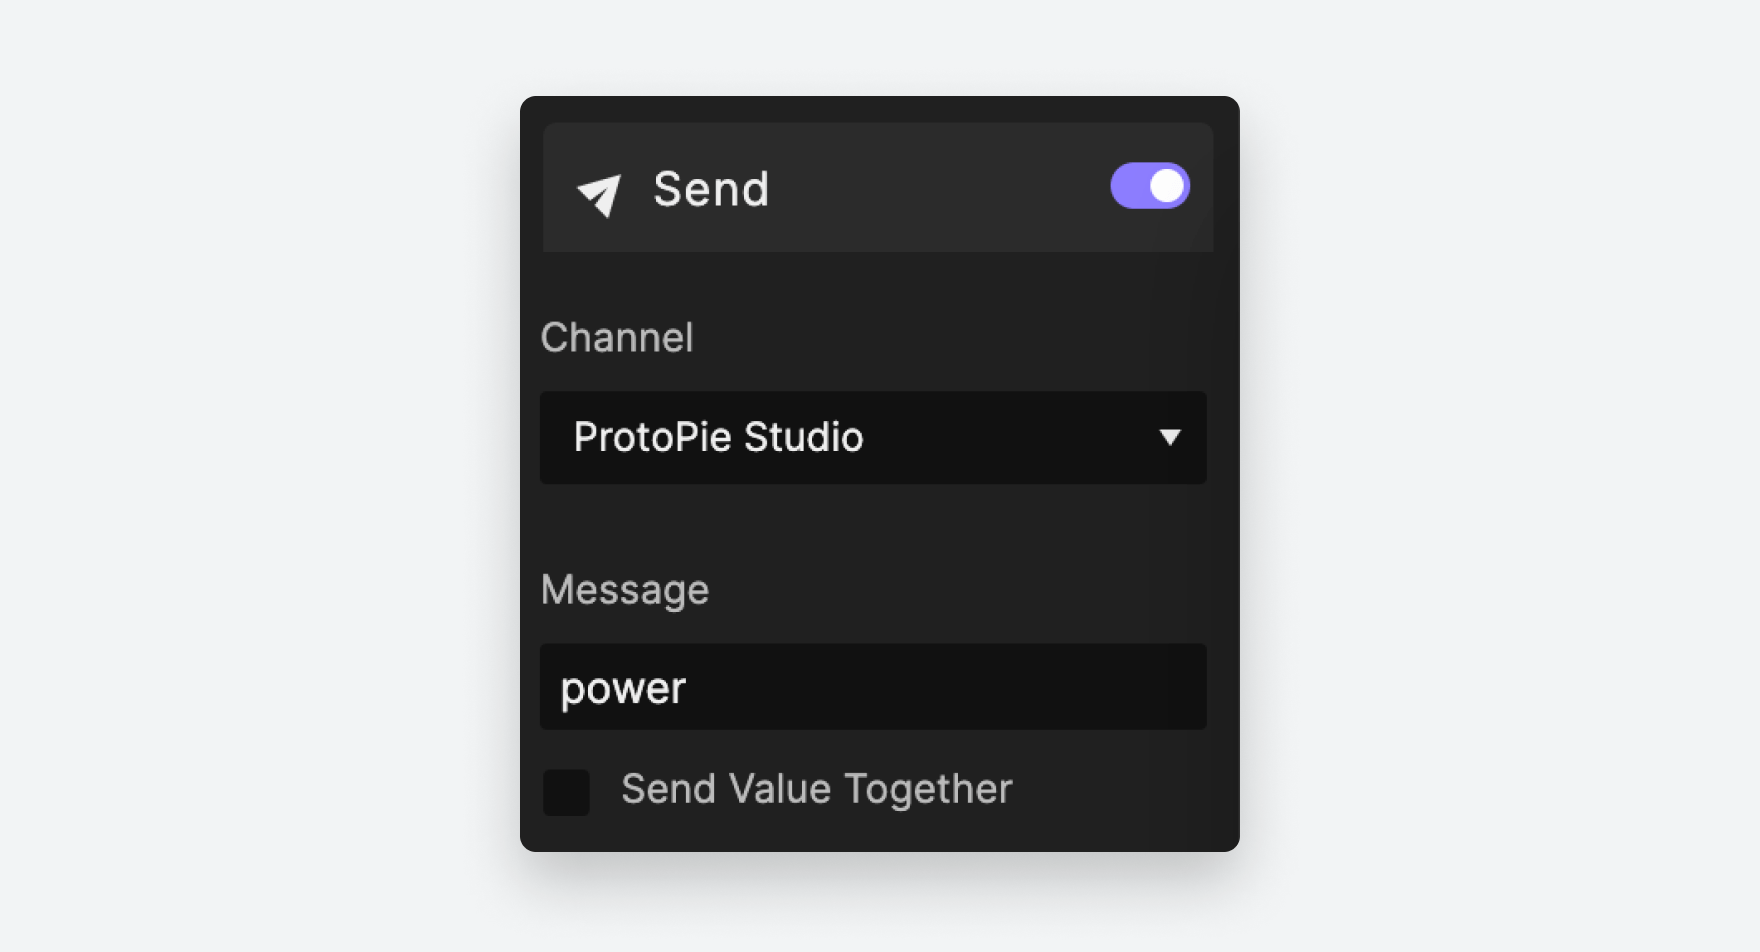 Send messages from ProtoPie